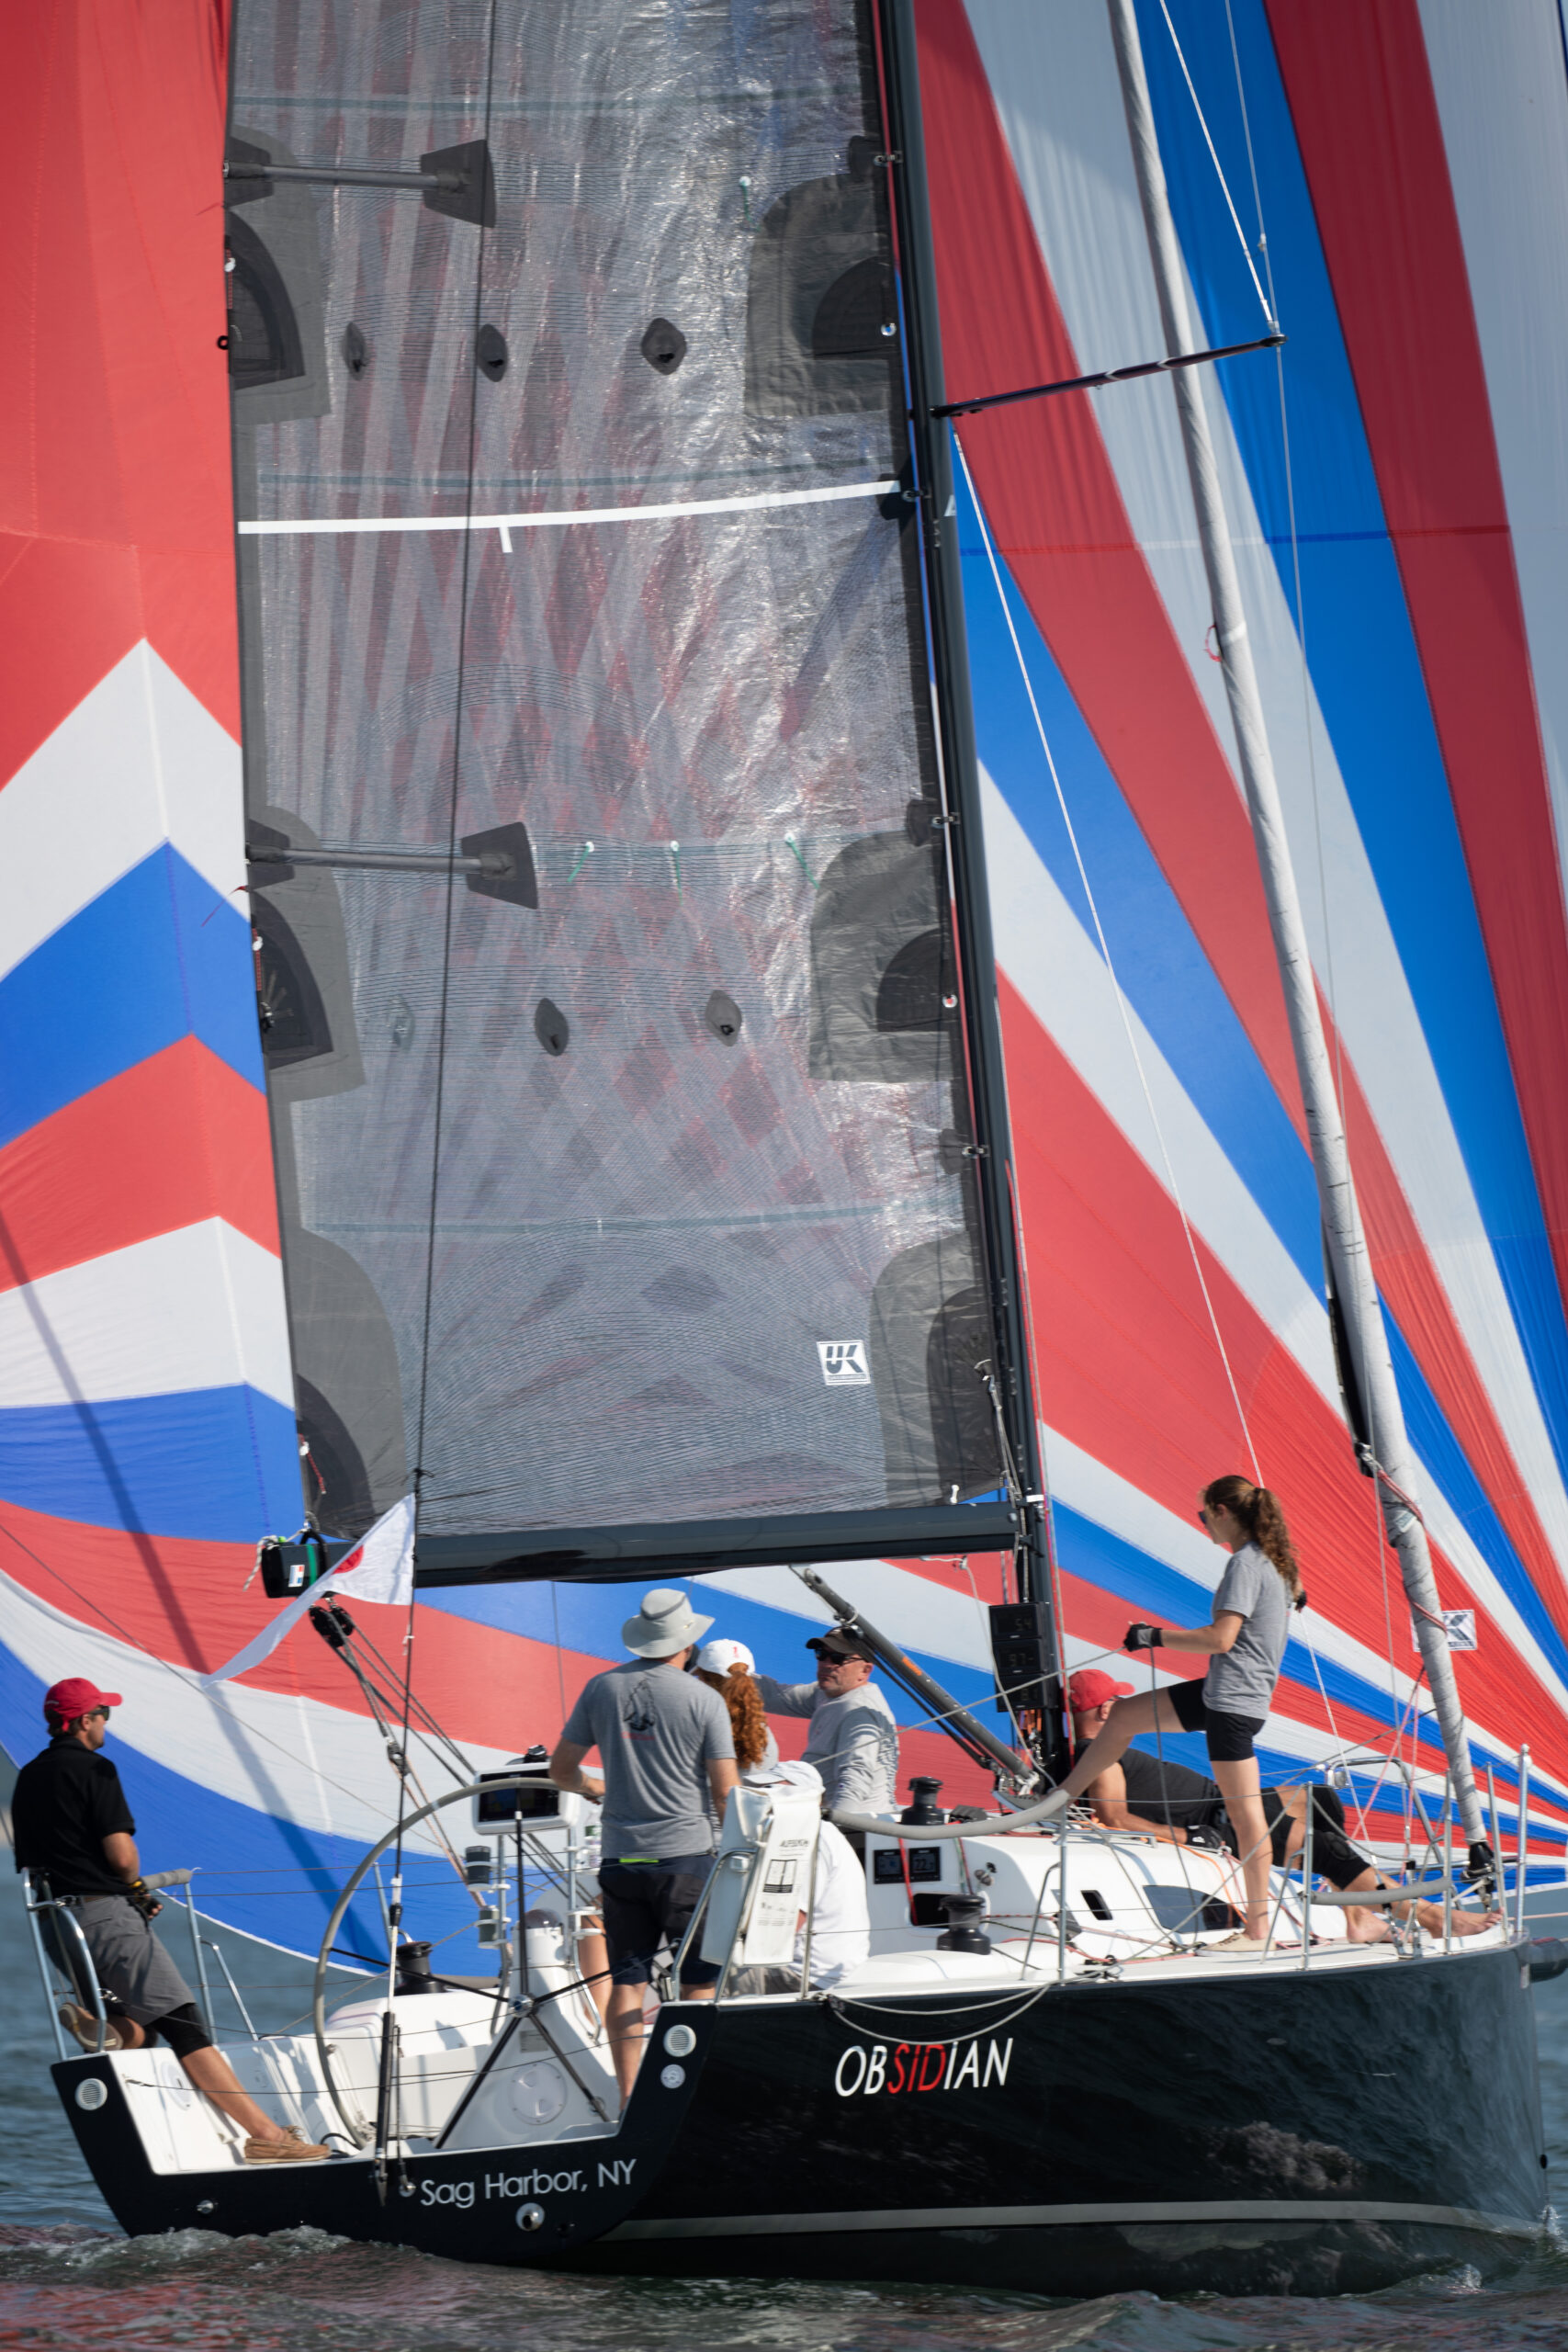 Obsidian with its large red, white and blue spinnaker out.  GARY SENFT/EASTENDMARINEPHOTOGRAPHY.COM